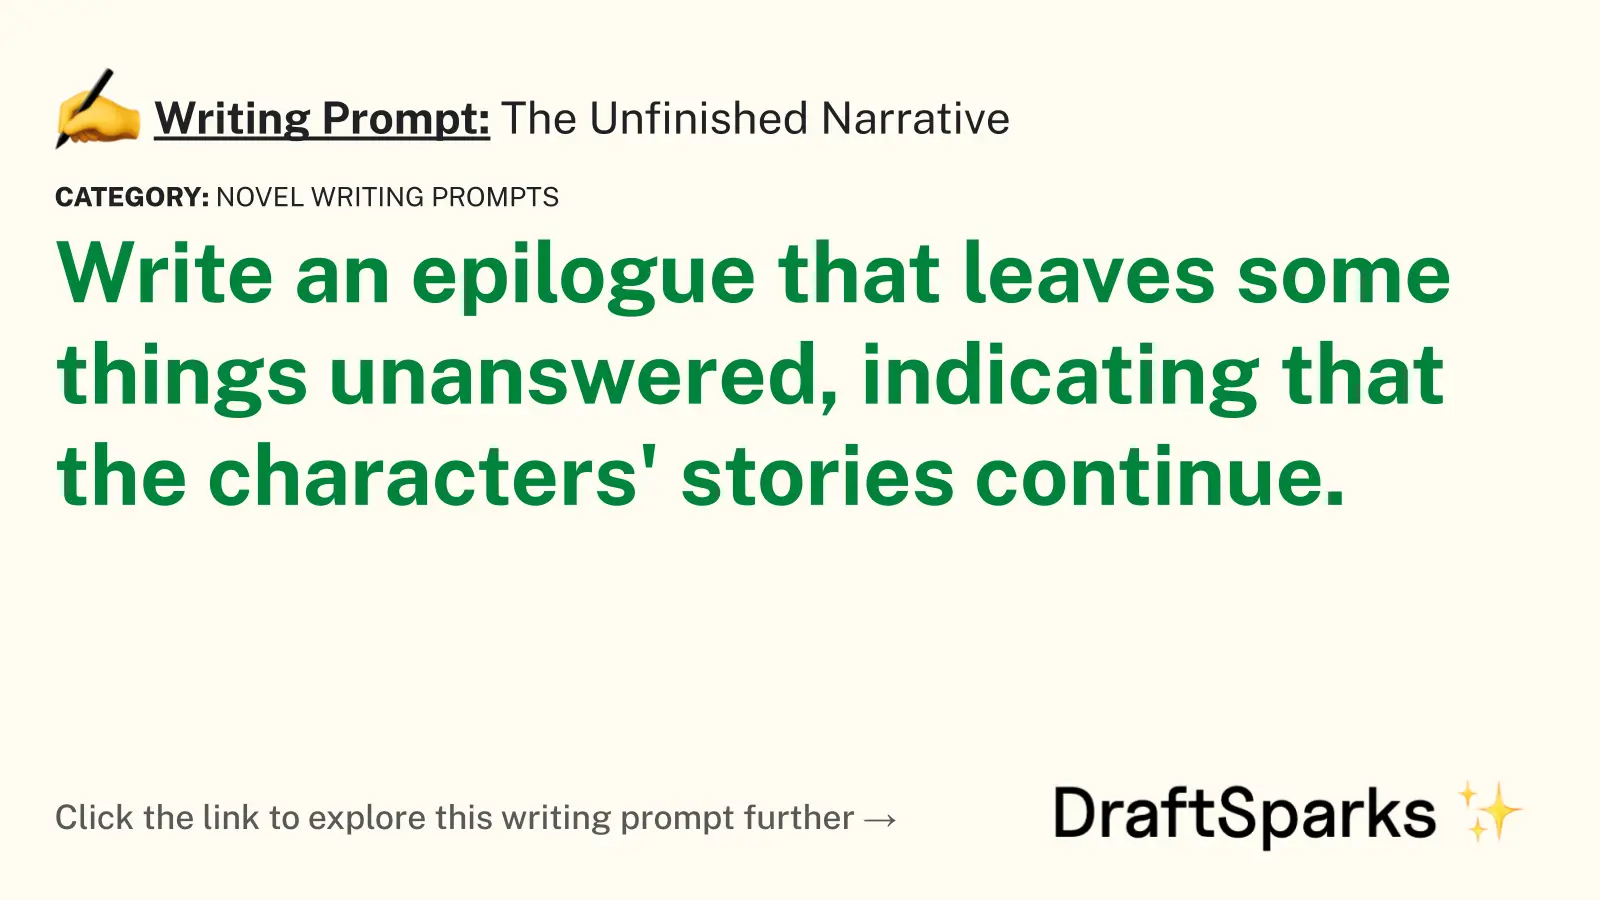 The Unfinished Narrative